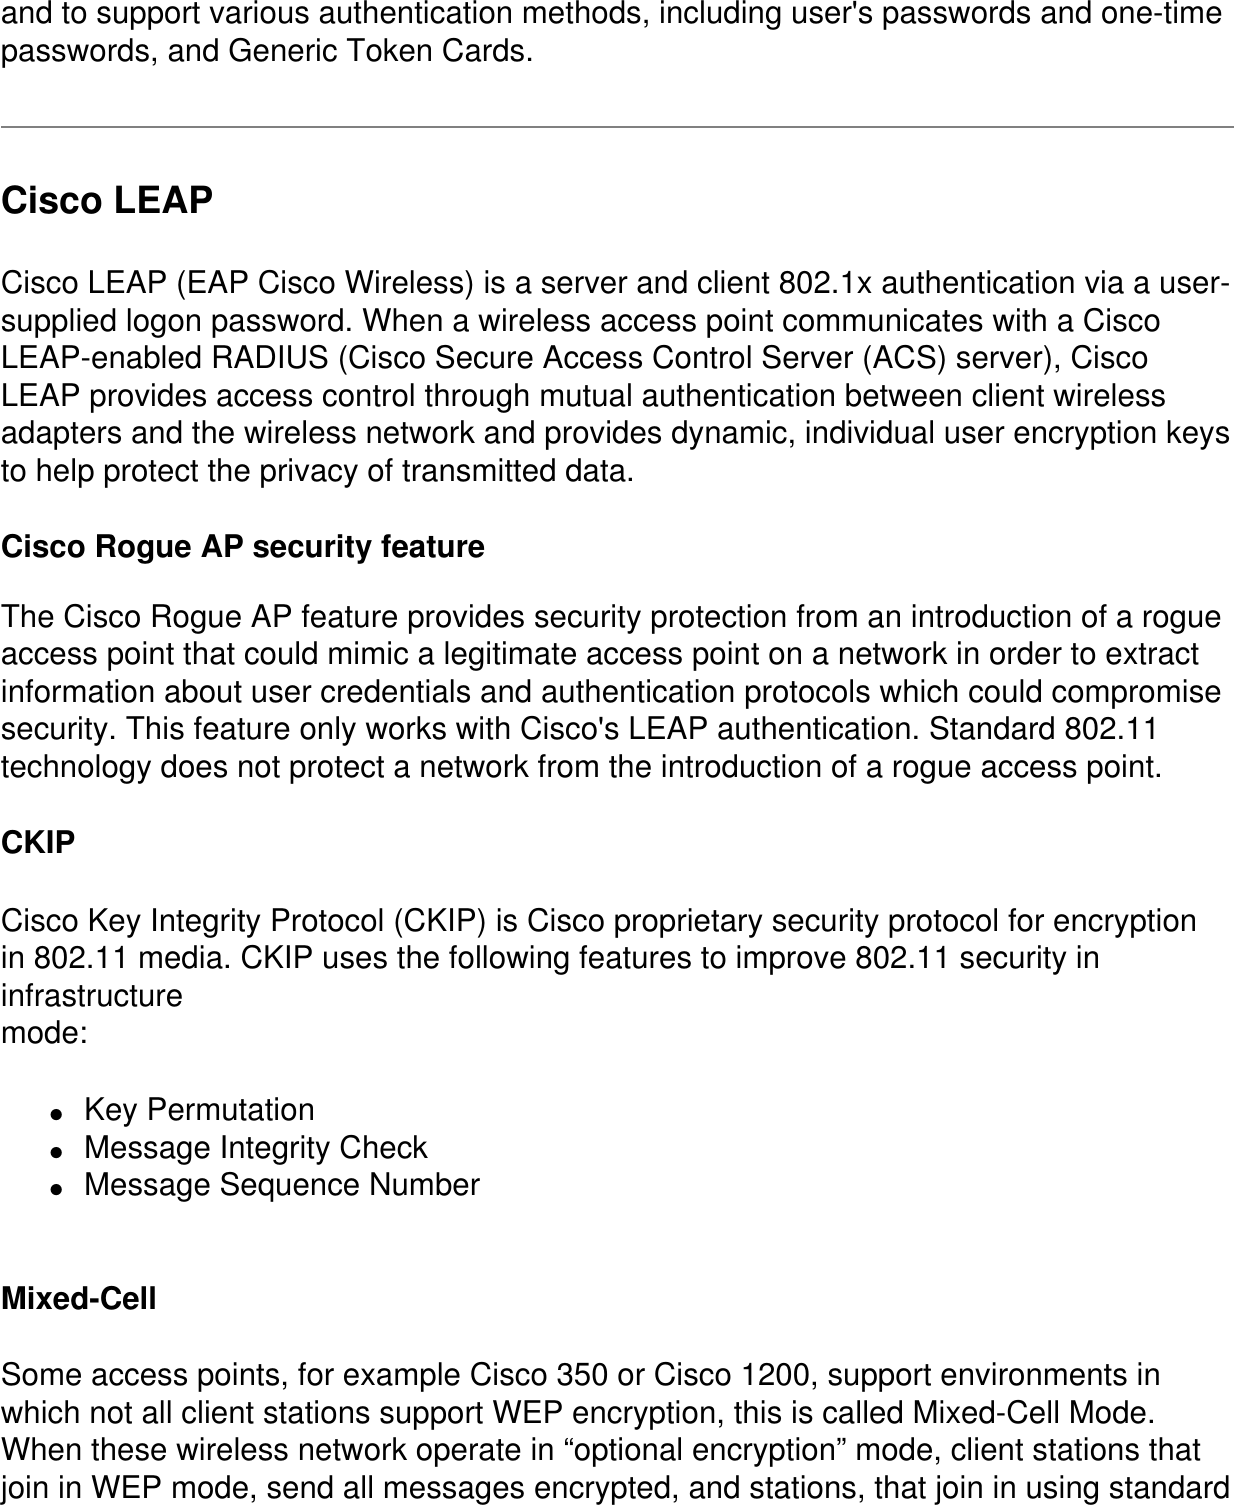 and to support various authentication methods, including user&apos;s passwords and one-time passwords, and Generic Token Cards.Cisco LEAPCisco LEAP (EAP Cisco Wireless) is a server and client 802.1x authentication via a user-supplied logon password. When a wireless access point communicates with a Cisco LEAP-enabled RADIUS (Cisco Secure Access Control Server (ACS) server), Cisco LEAP provides access control through mutual authentication between client wireless adapters and the wireless network and provides dynamic, individual user encryption keys to help protect the privacy of transmitted data. Cisco Rogue AP security featureThe Cisco Rogue AP feature provides security protection from an introduction of a rogue access point that could mimic a legitimate access point on a network in order to extract information about user credentials and authentication protocols which could compromise security. This feature only works with Cisco&apos;s LEAP authentication. Standard 802.11 technology does not protect a network from the introduction of a rogue access point. CKIPCisco Key Integrity Protocol (CKIP) is Cisco proprietary security protocol for encryptionin 802.11 media. CKIP uses the following features to improve 802.11 security in infrastructuremode:●     Key Permutation●     Message Integrity Check●     Message Sequence Number Mixed-Cell Some access points, for example Cisco 350 or Cisco 1200, support environments in which not all client stations support WEP encryption, this is called Mixed-Cell Mode. When these wireless network operate in “optional encryption” mode, client stations that join in WEP mode, send all messages encrypted, and stations, that join in using standard 